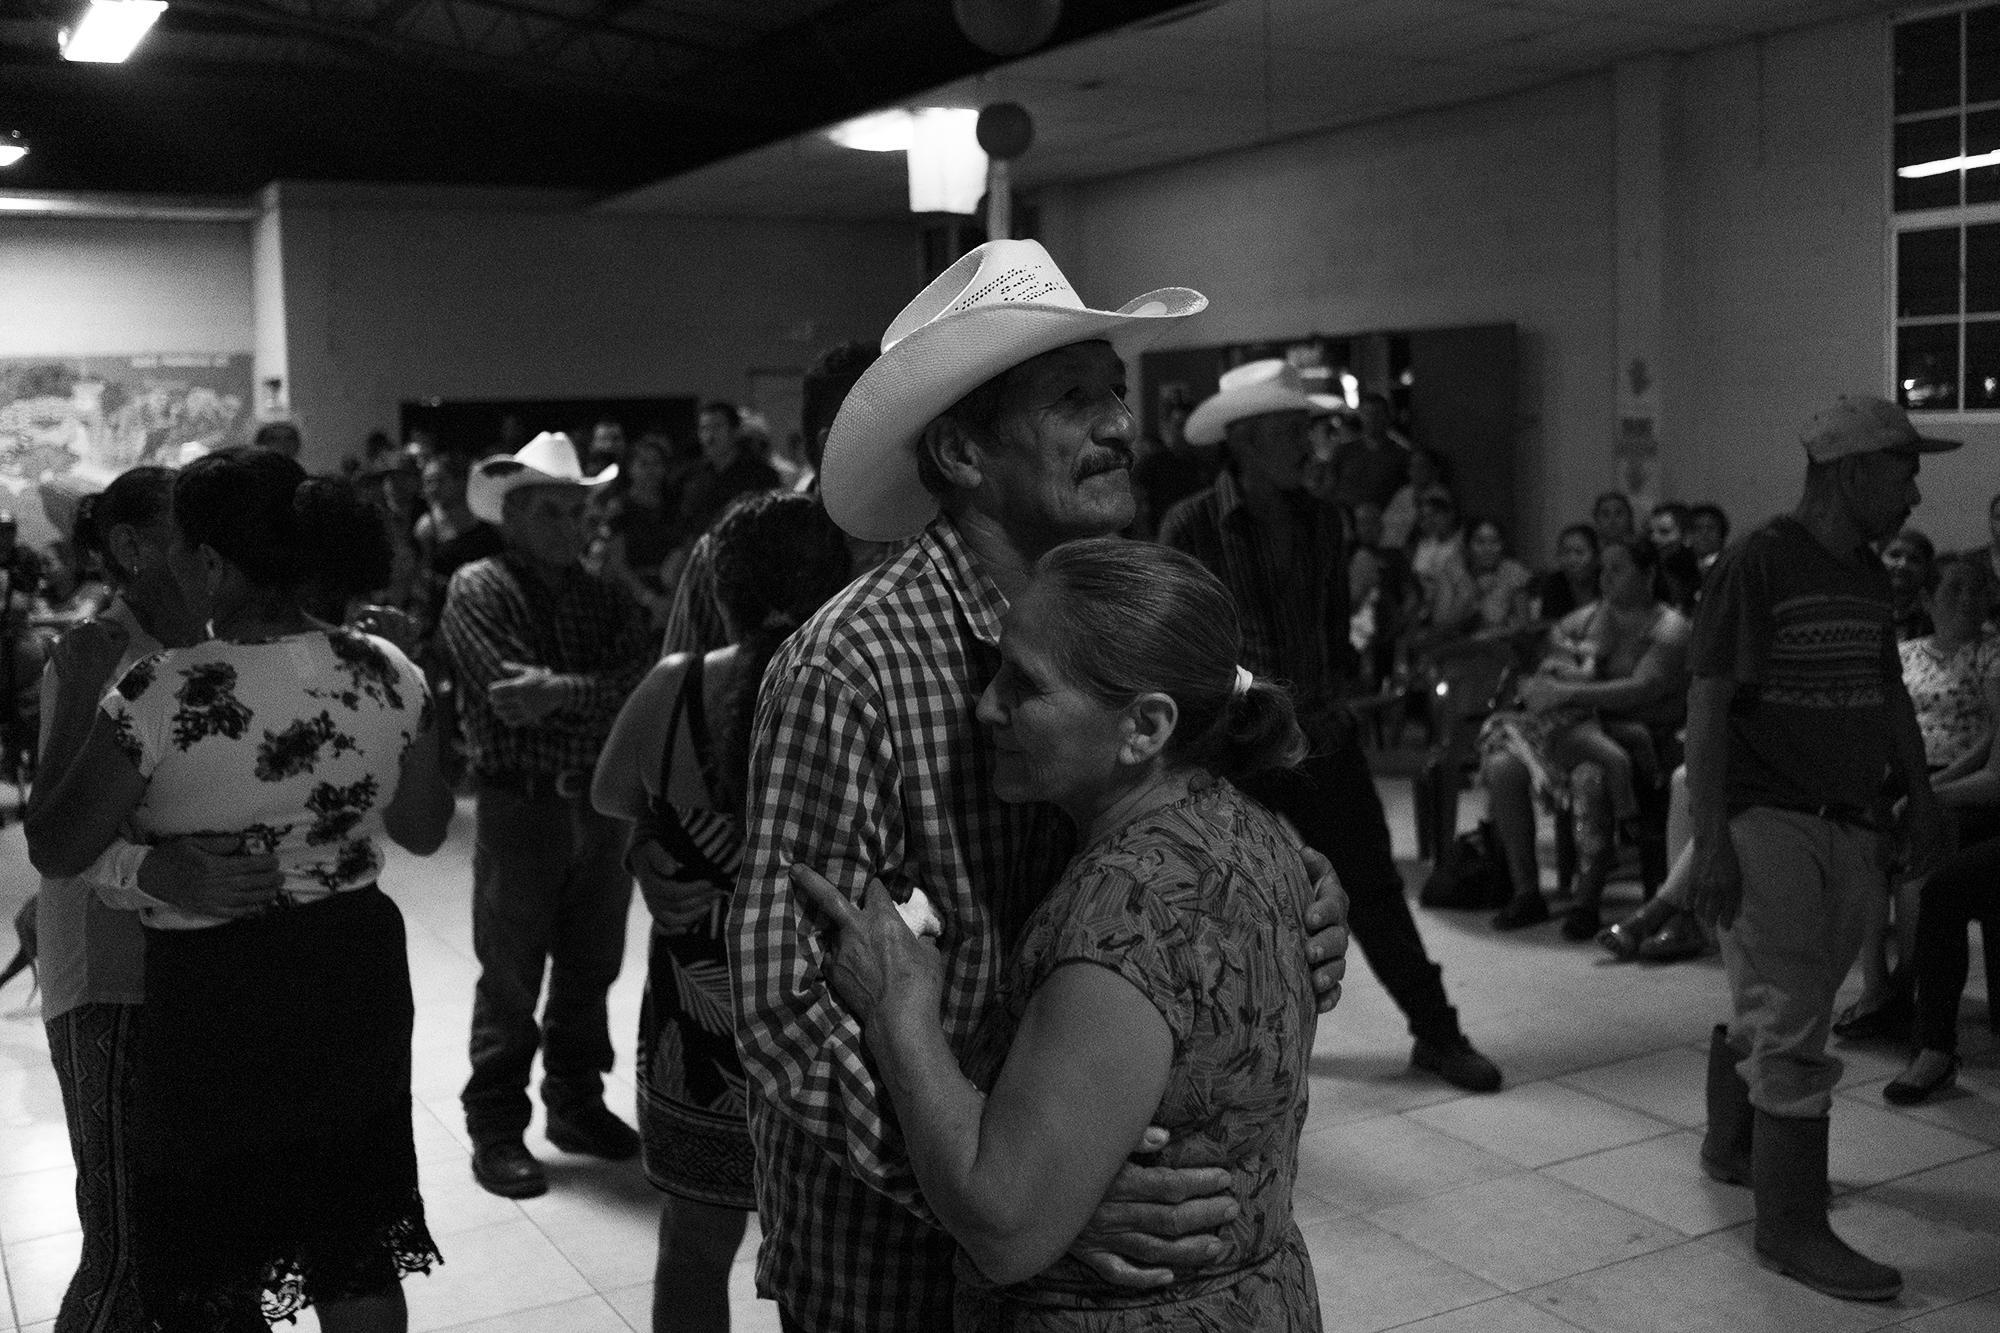 Gerardo Leiva and his wife, Dolores, hold each other as they dance to banda music during the celebration for community elders. 38 years ago, Dolores held on to her husband as they crossed the Lempa River to escape the Salvadoran Army.